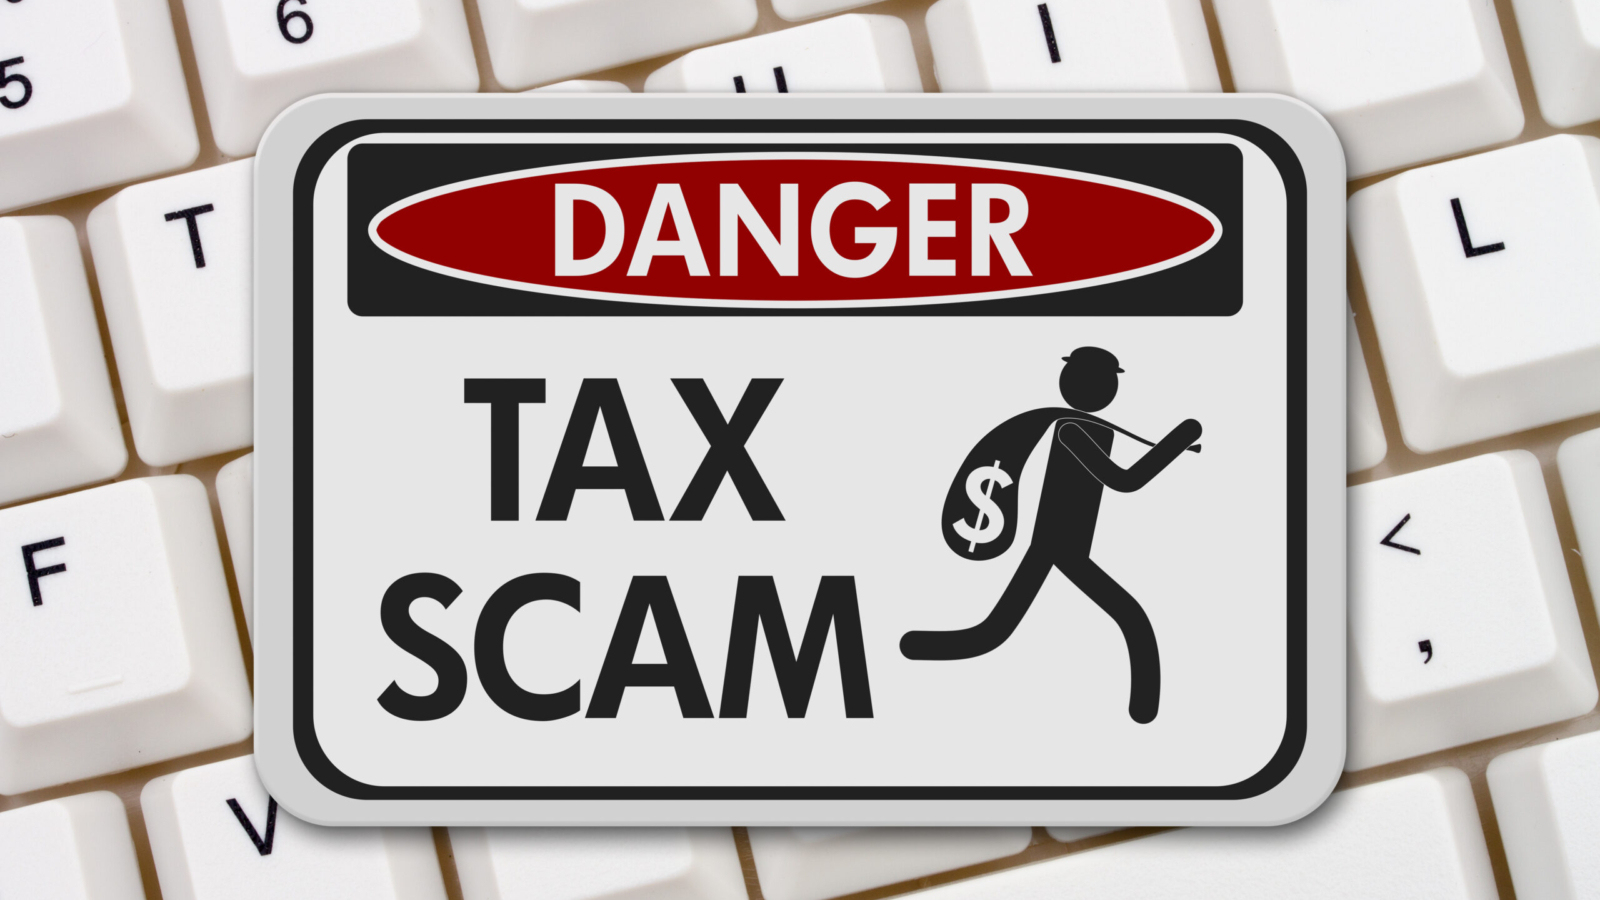 Tax scam danger sign, A black and white danger sign with text Tax Scam and theft icon on a keyboard